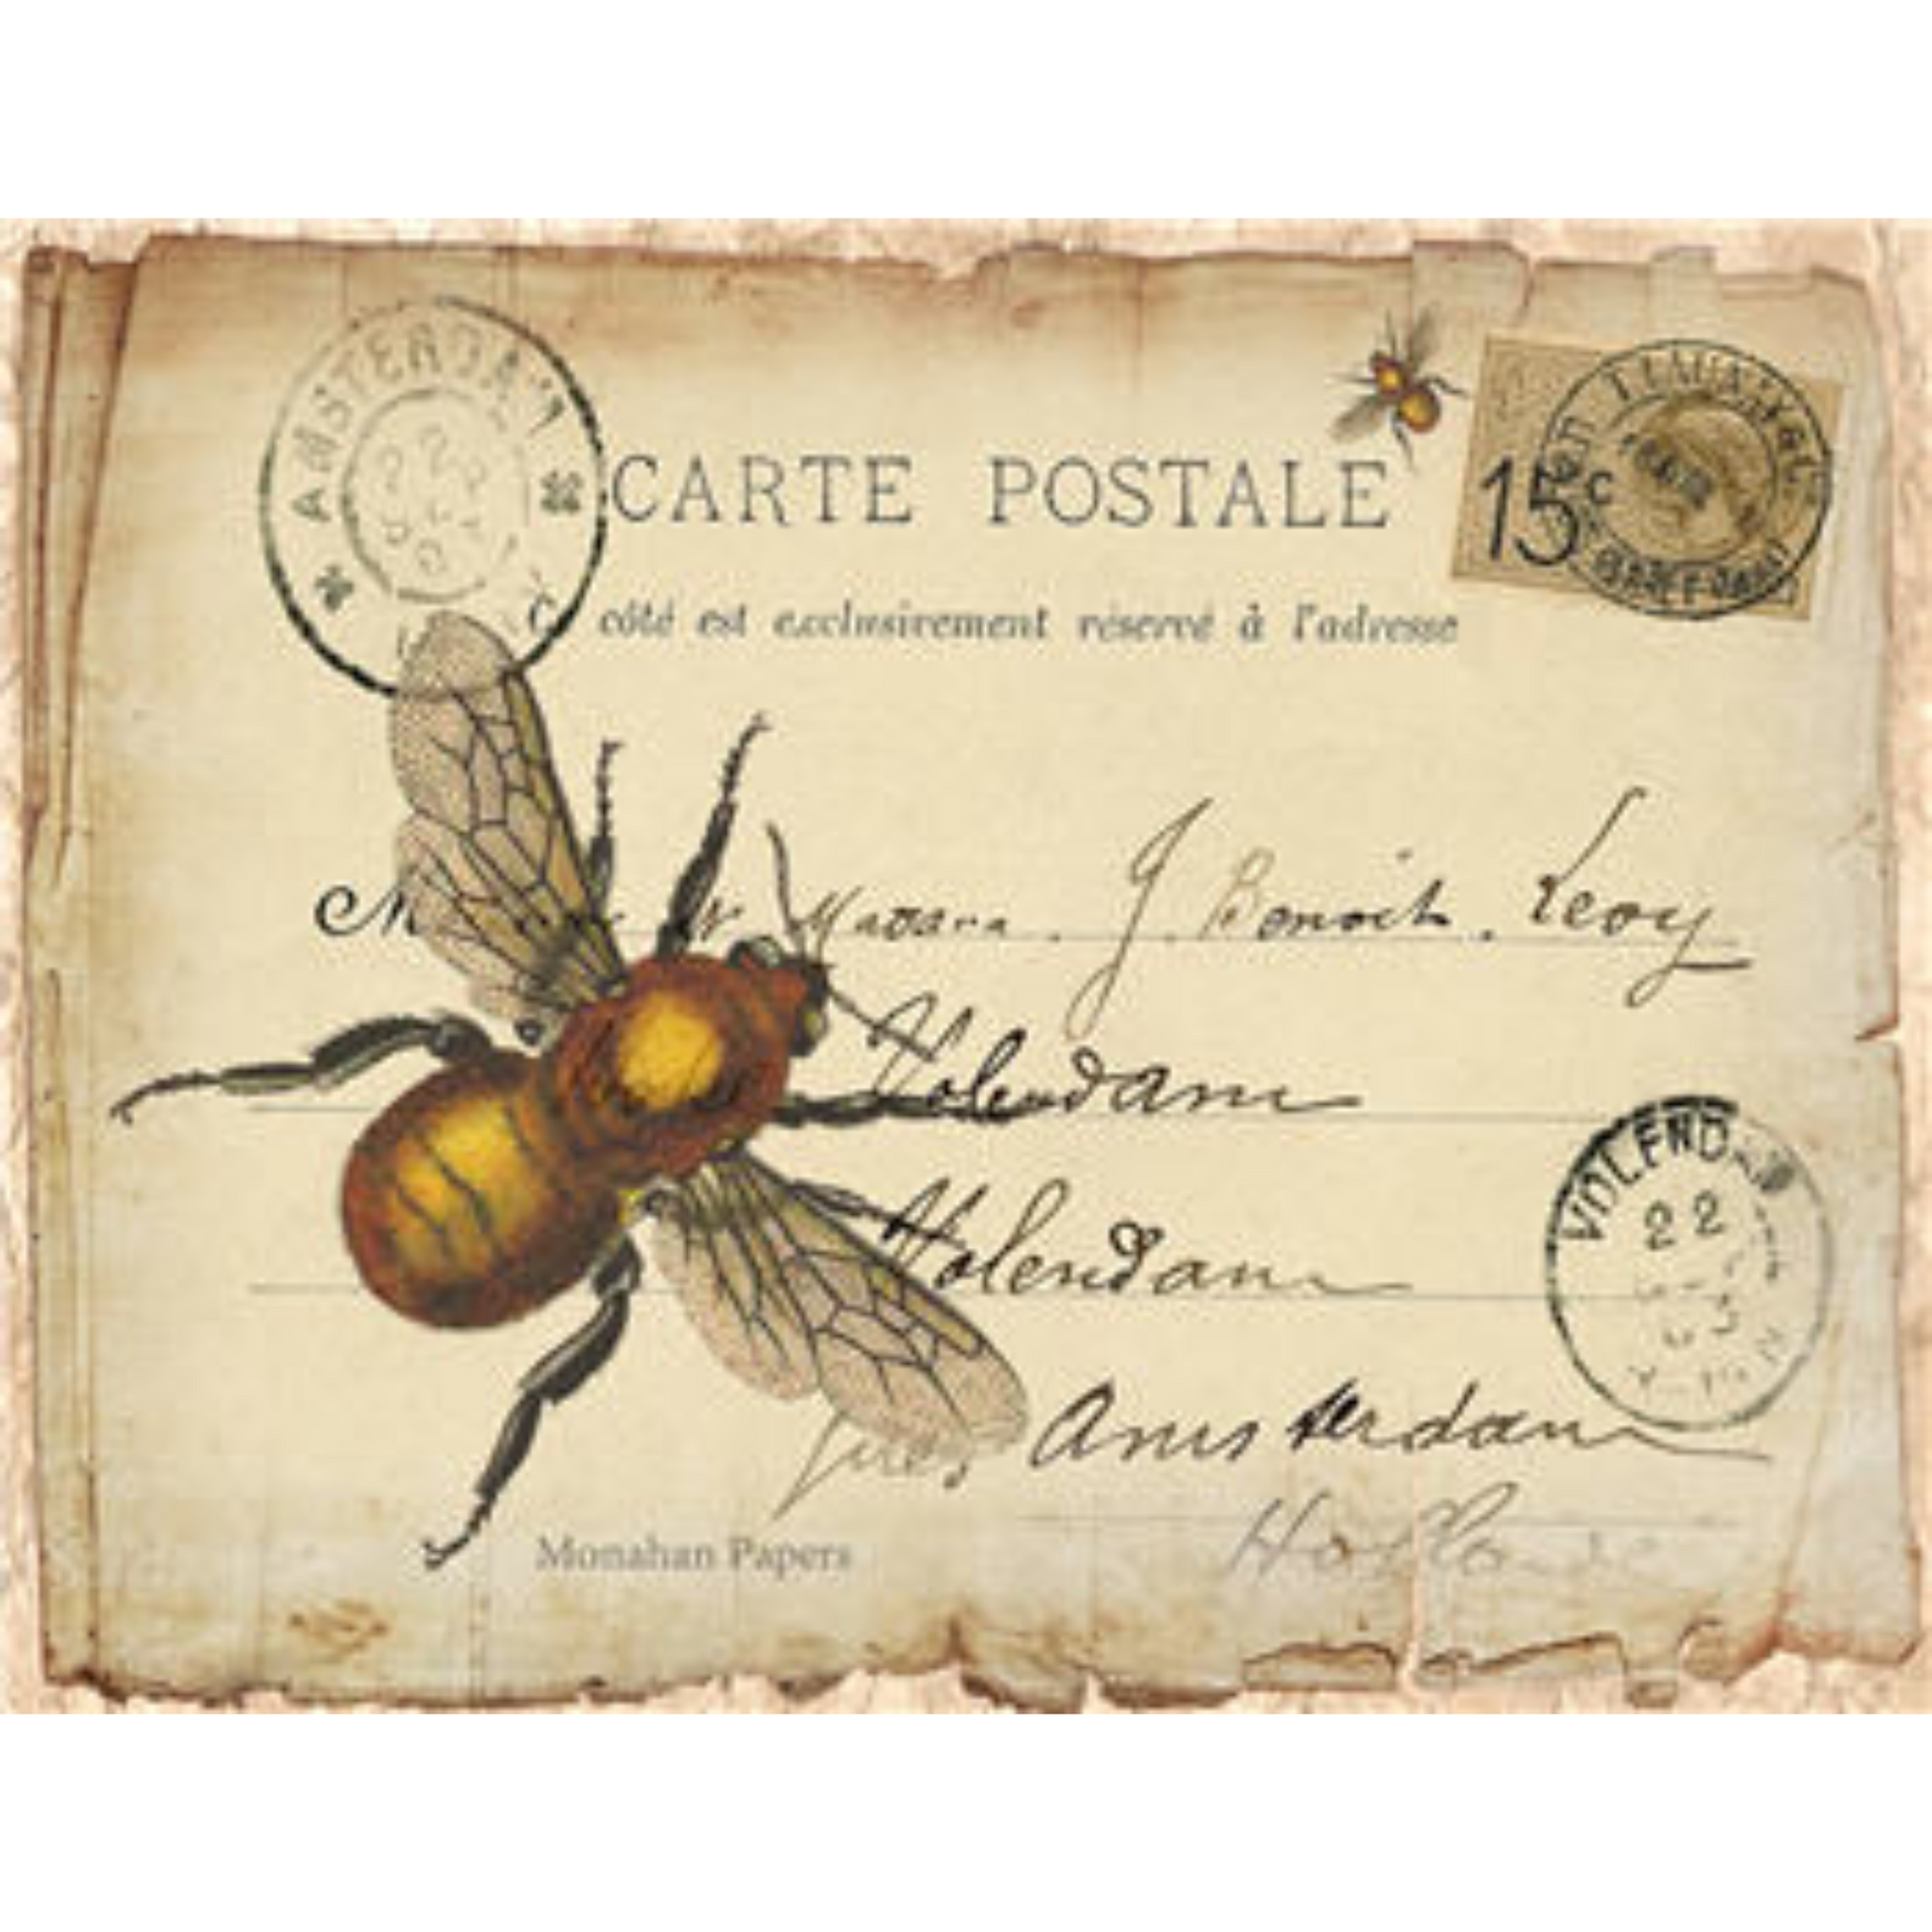 La Carte Bee - Decoupage Paper by Monahan Papers. 11" x 17" available at Milton's Daughter.